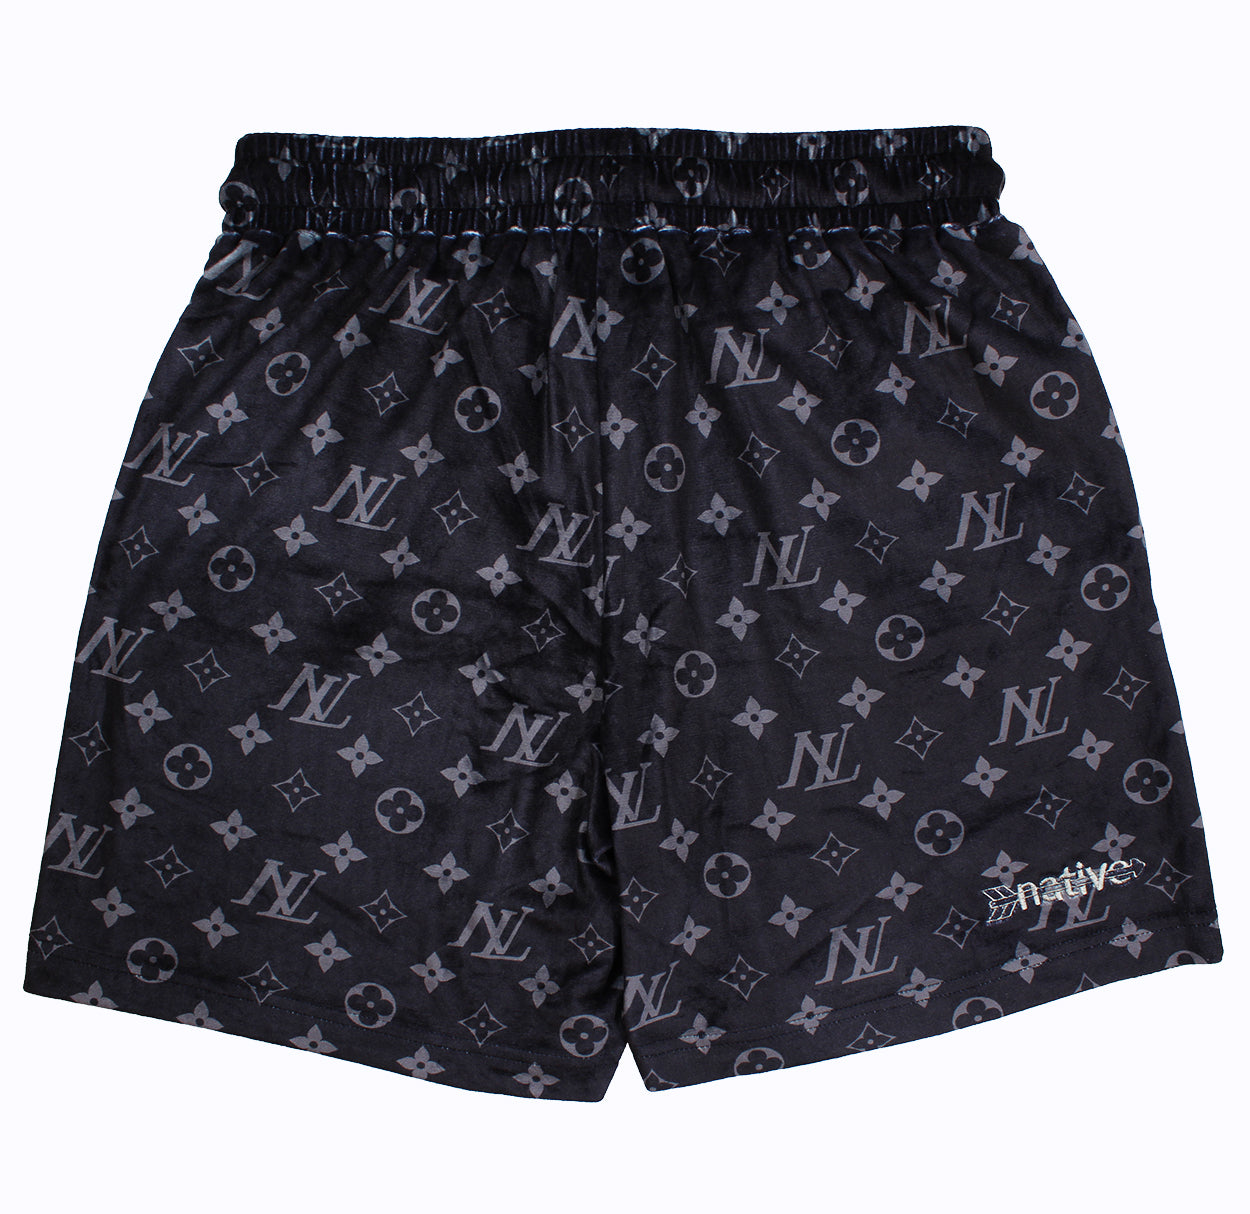 nl velour shorts in black/charcoal